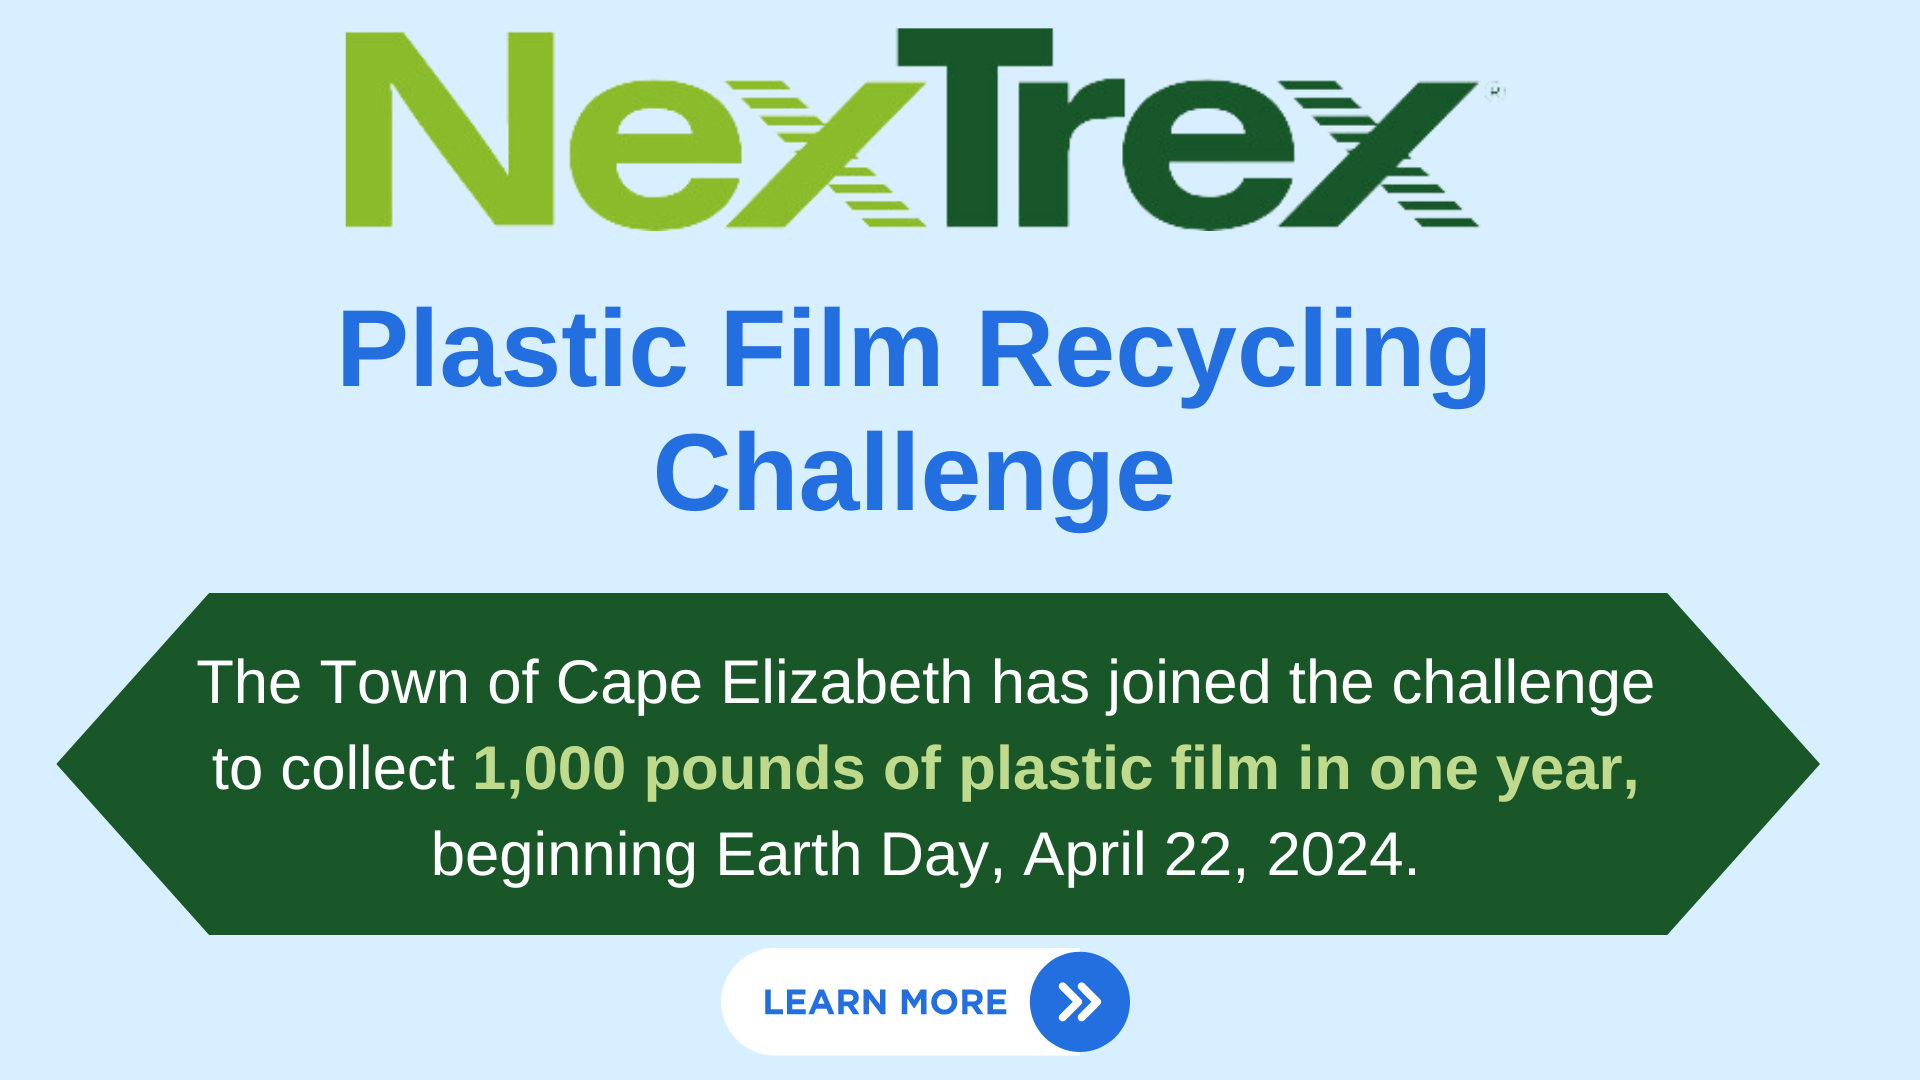 Information directing viewers to a page to learn about plastic film recycling in Cape Elizabeth